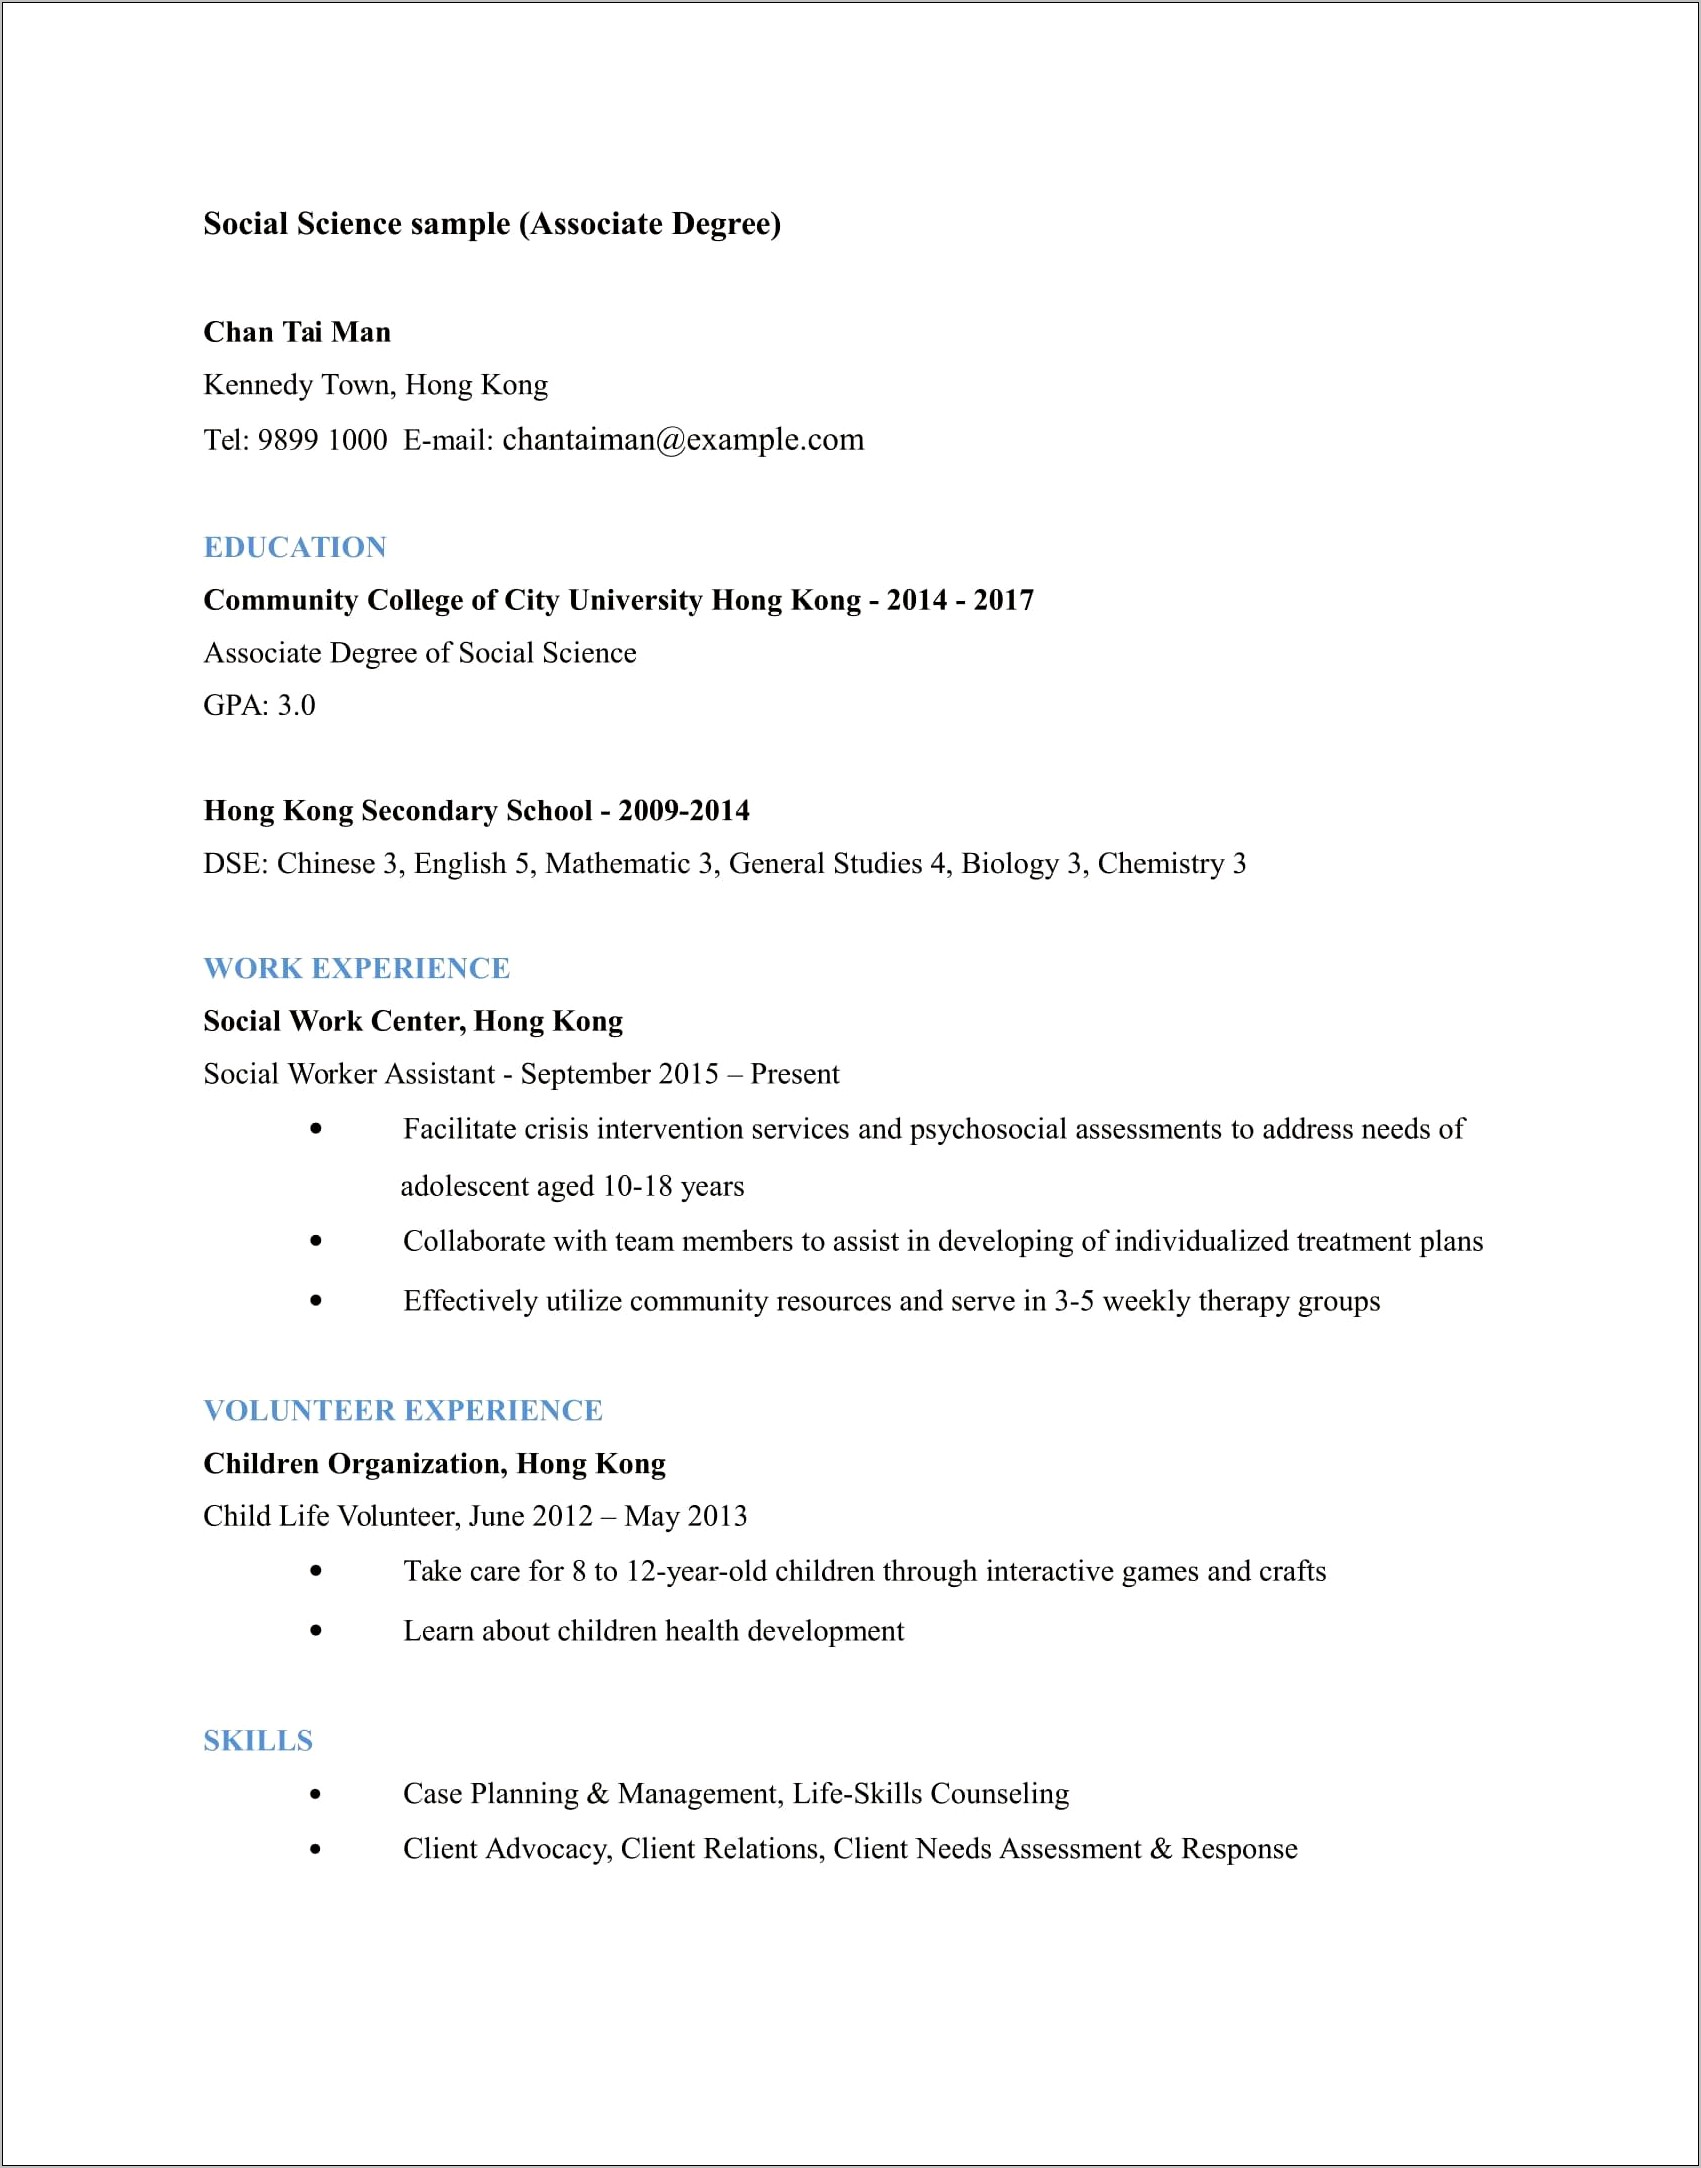 Sample Resume With Associate Degree